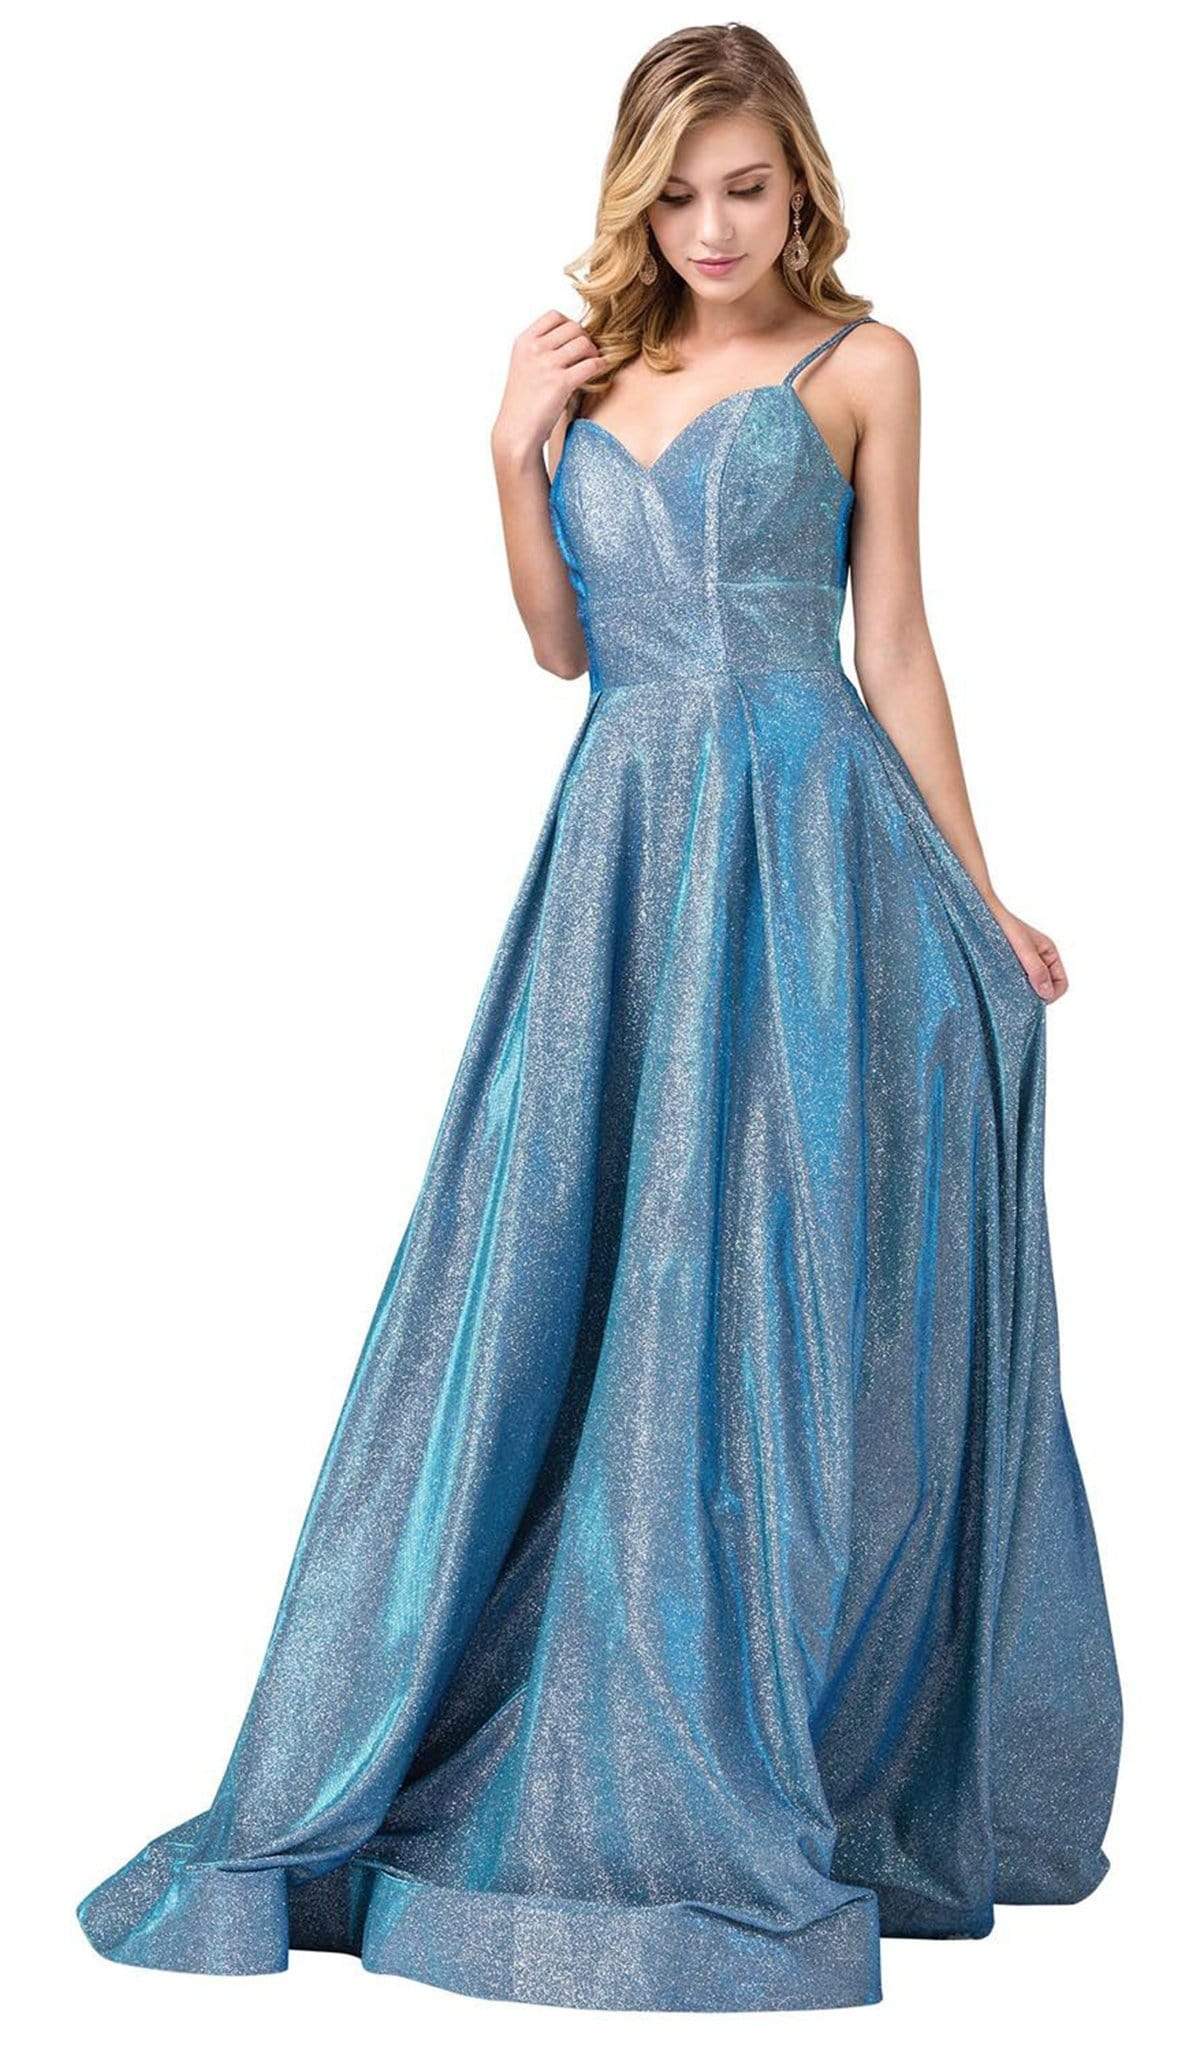 Dancing Queen - 2611 Sweetheart Lace Up Back Metallic Jersey Gown ...